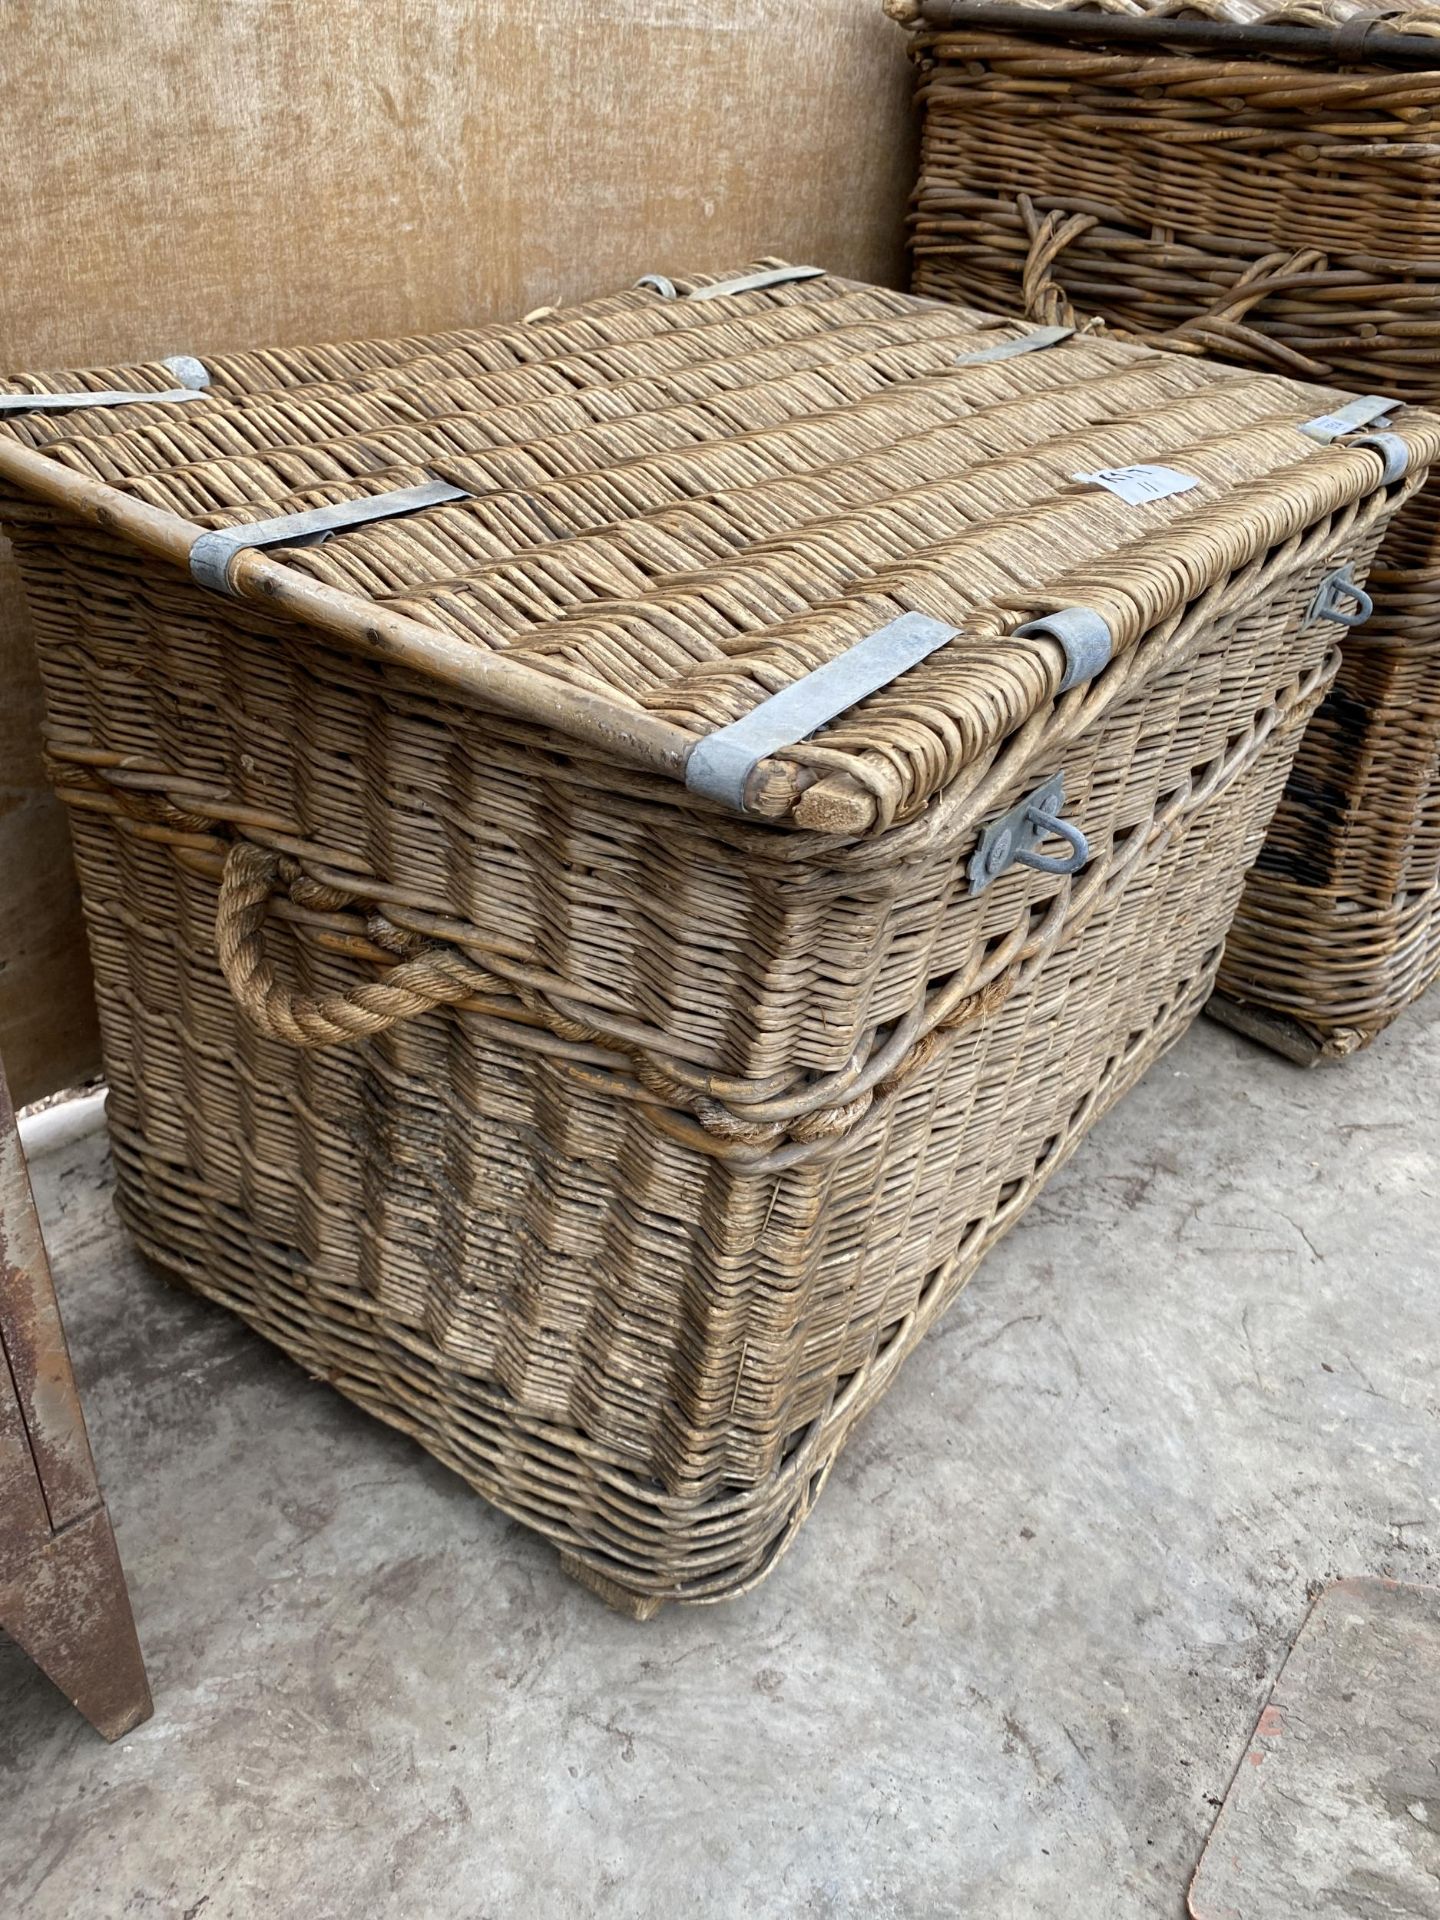 A LARGE WICKER LOG BASKET WITH HINGED LID AND METAL BANDING - Image 6 of 6